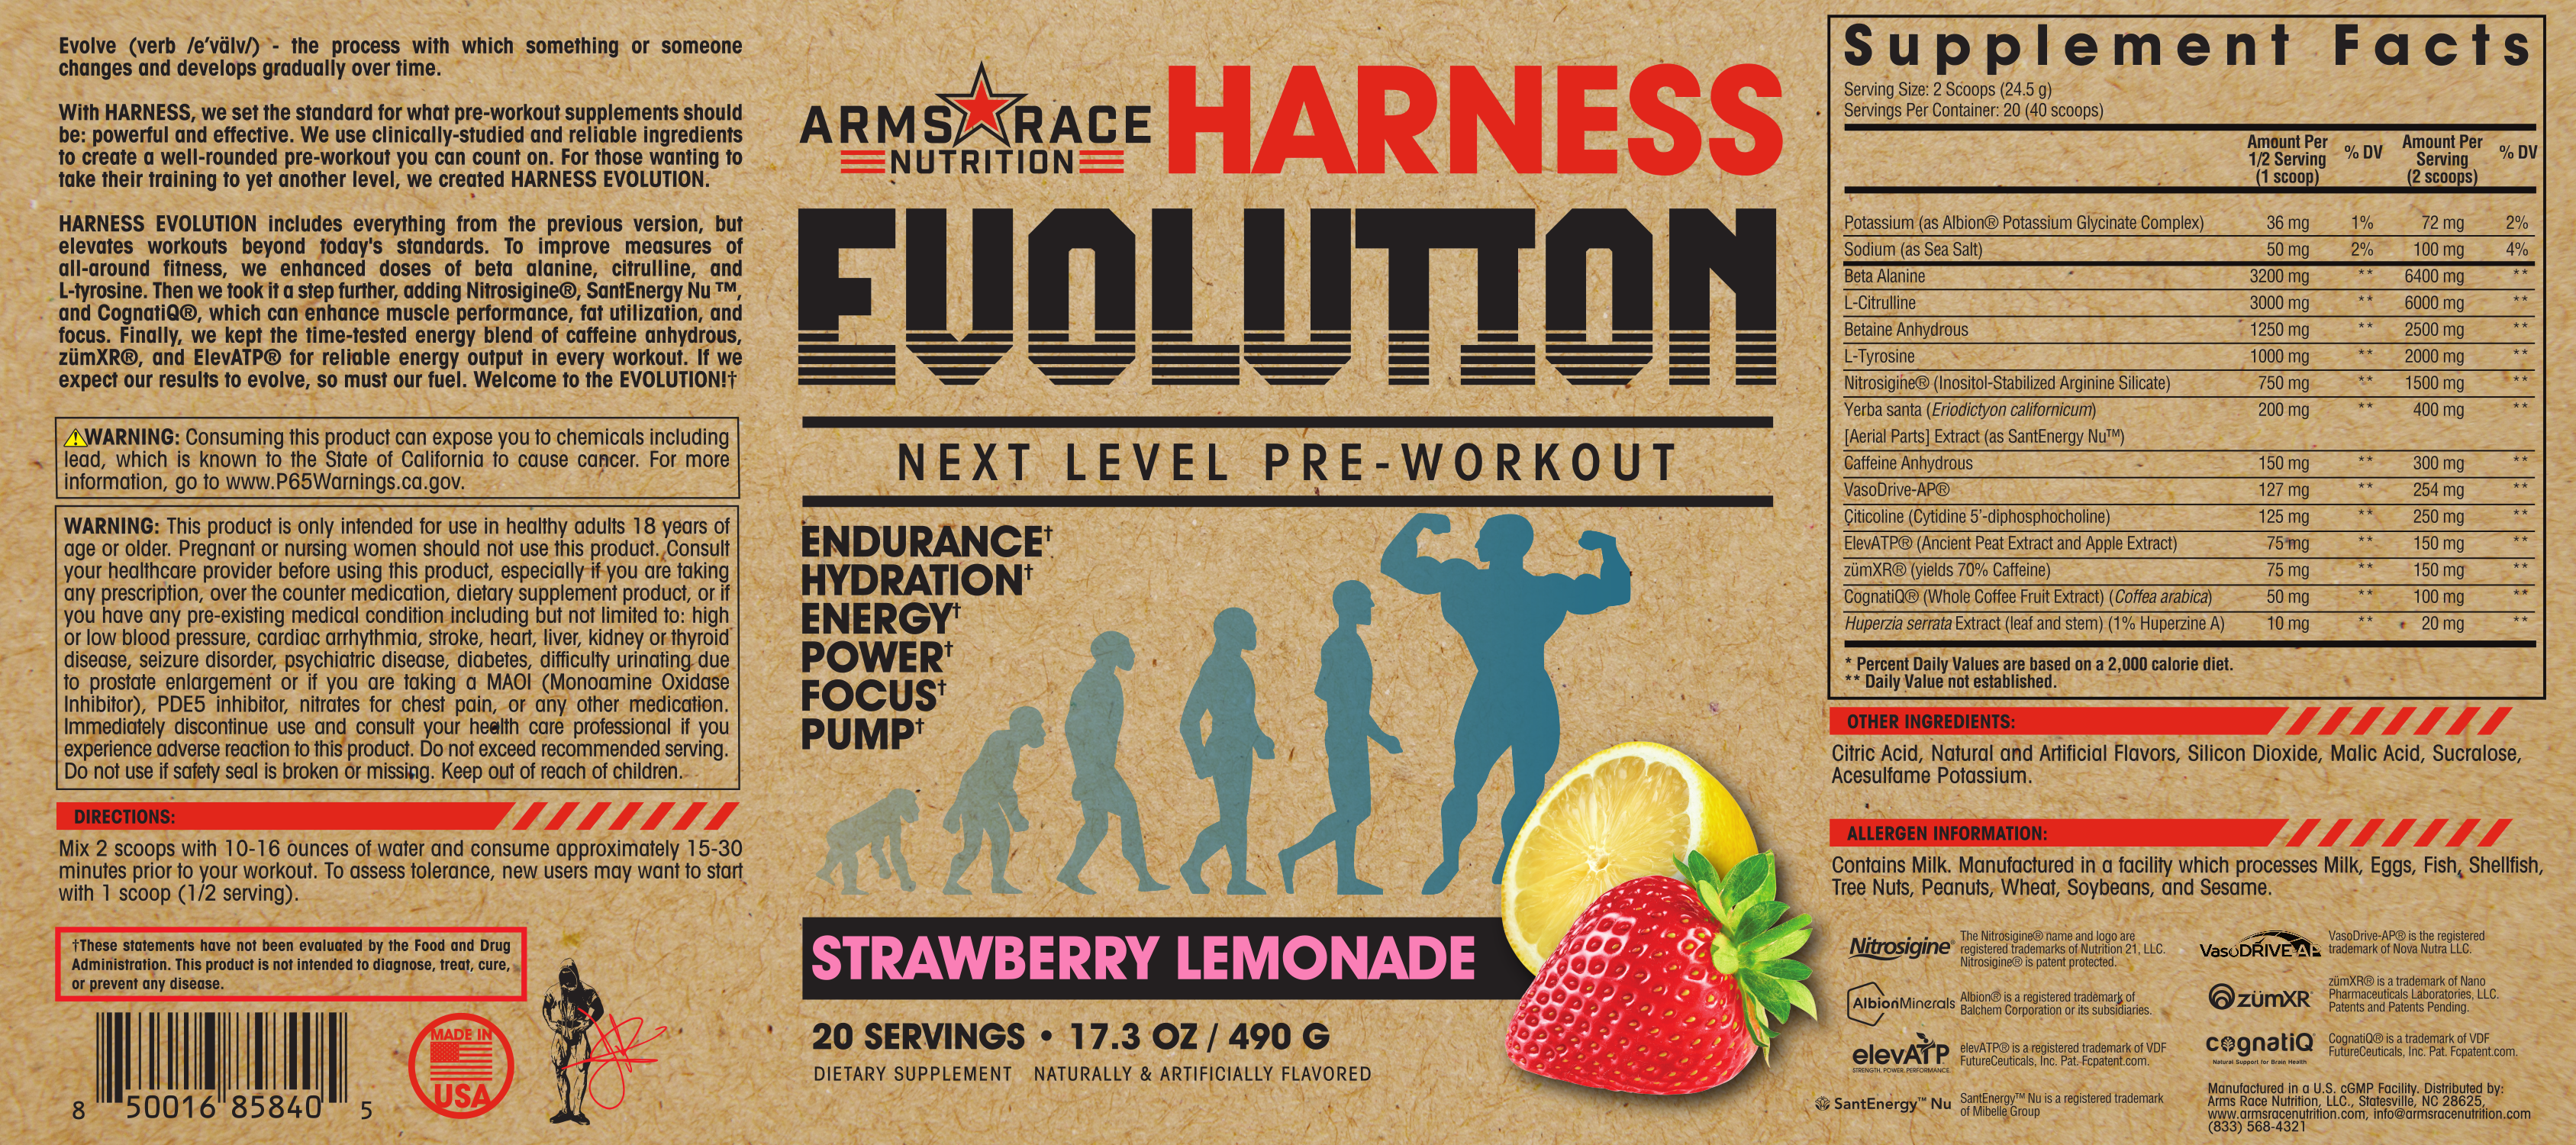 Arms Race Nutrition Harness Evolution Label